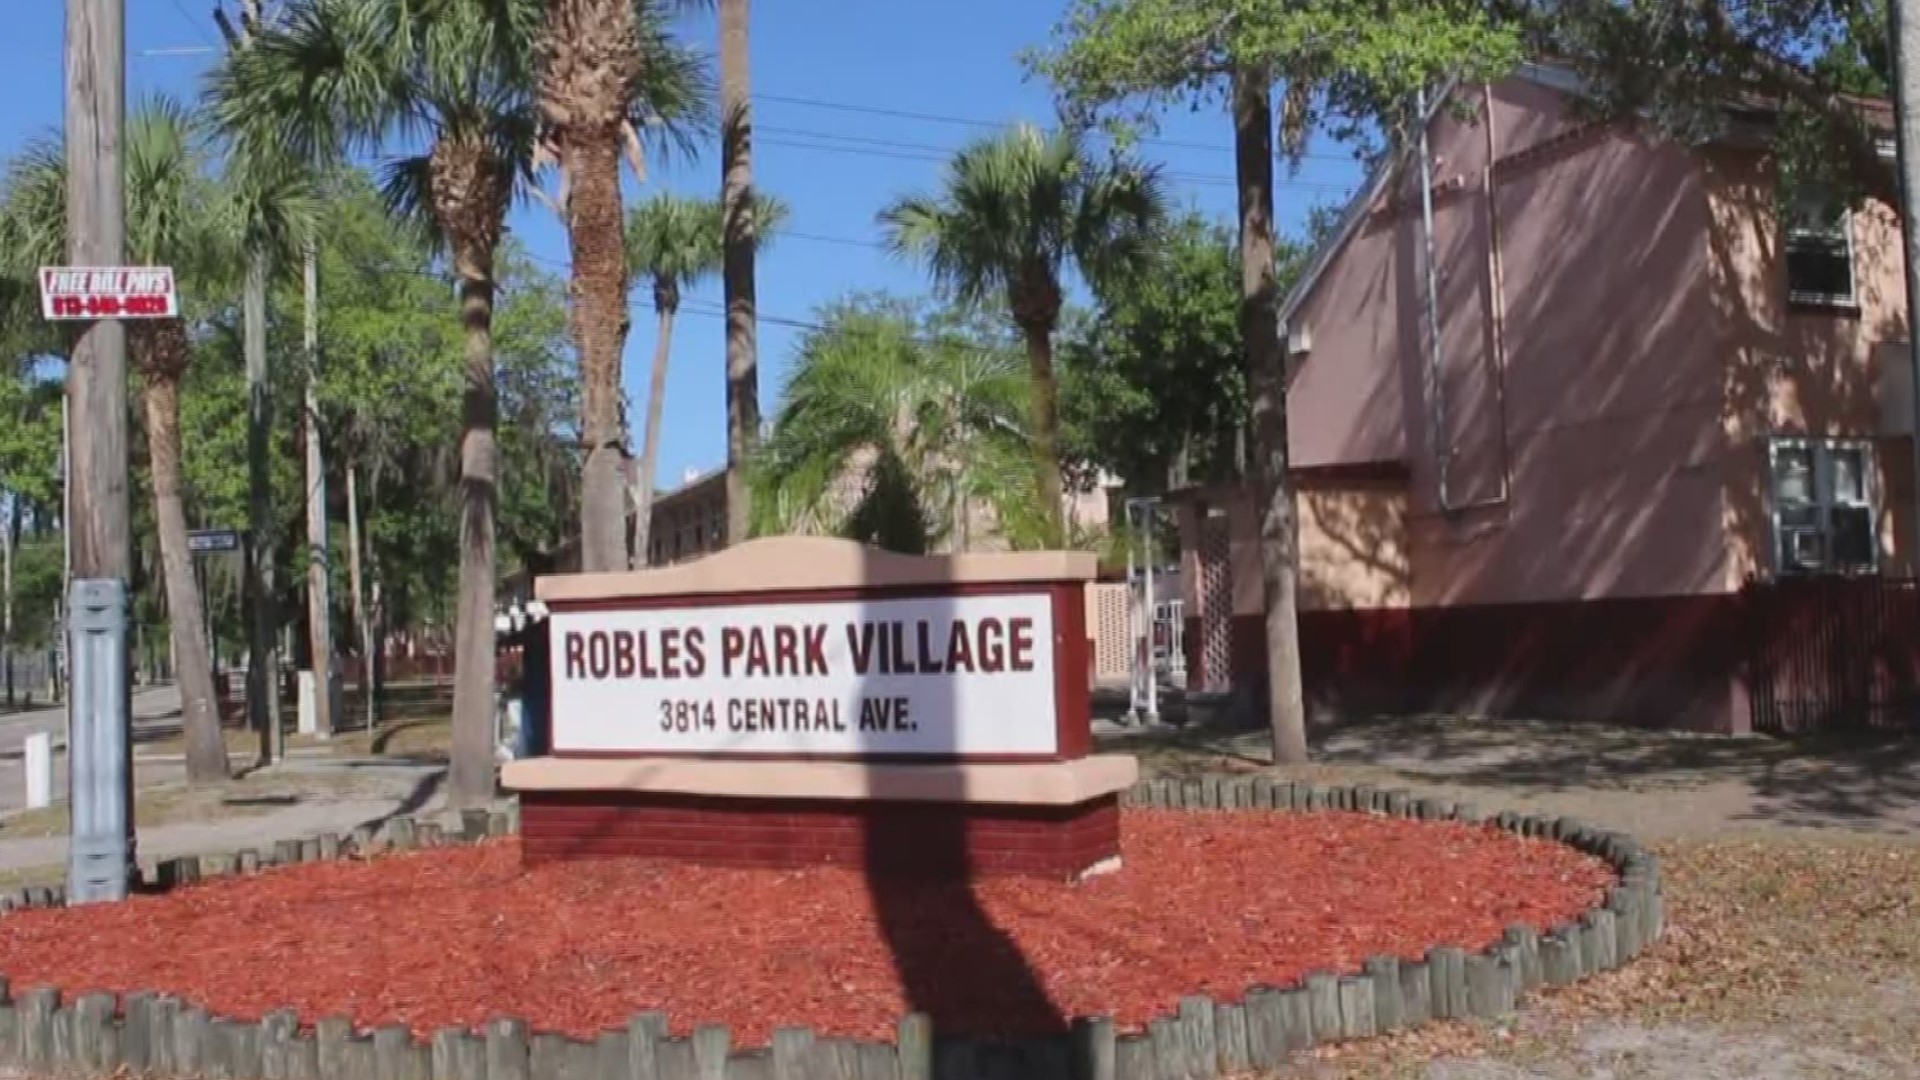 Community leaders are demanding answers about what happened to hundreds of graves from Tampa's first African American cemetery. The cemetery was located along Florida Avenue and sits underneath part of Robles Park, which is a public housing development.